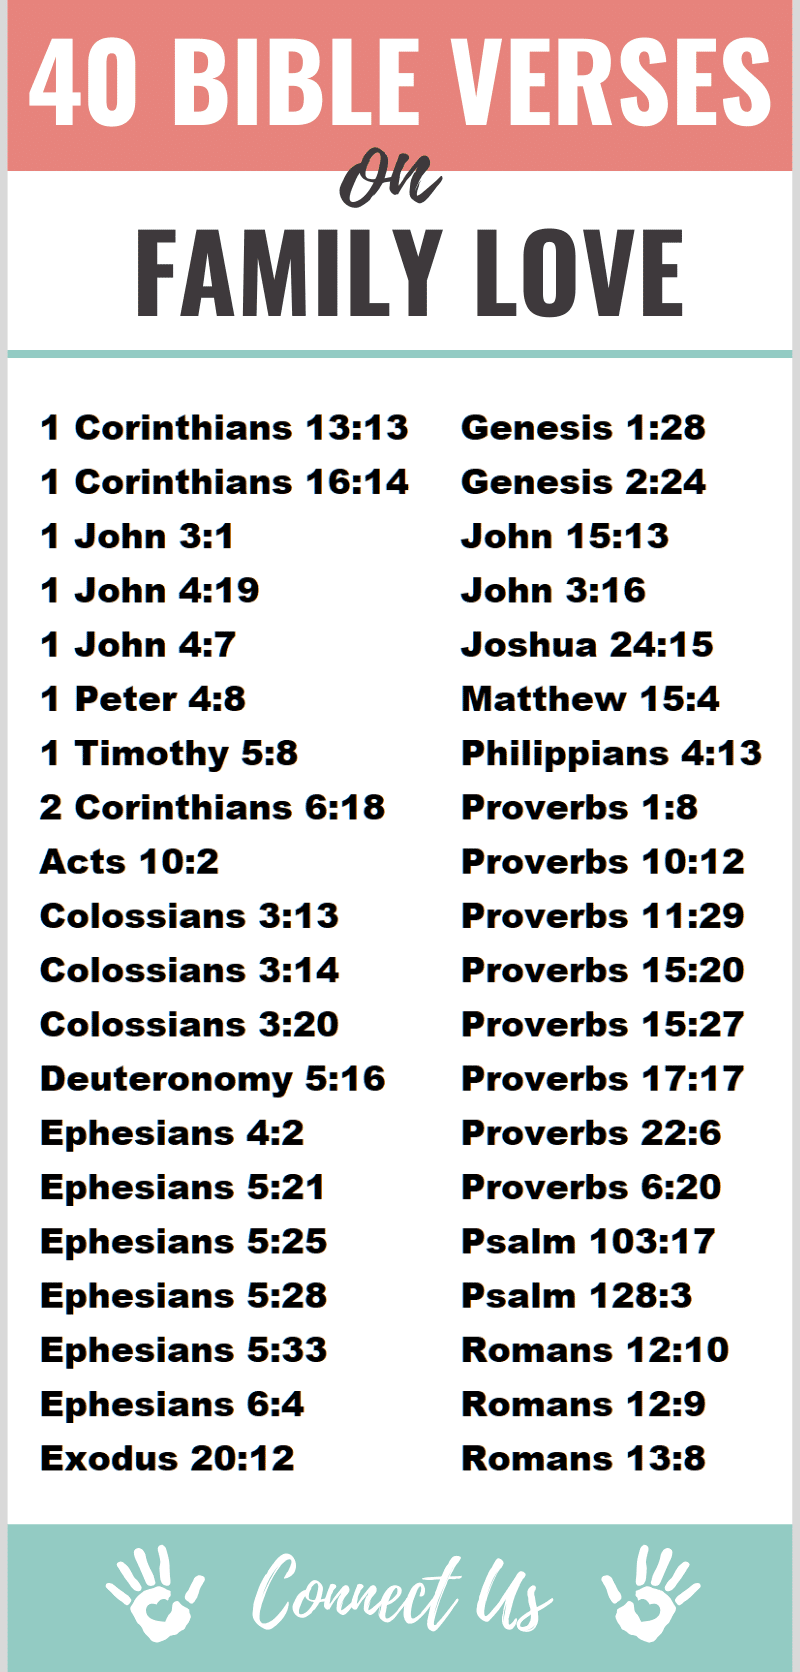 Bible Verses on Family Love